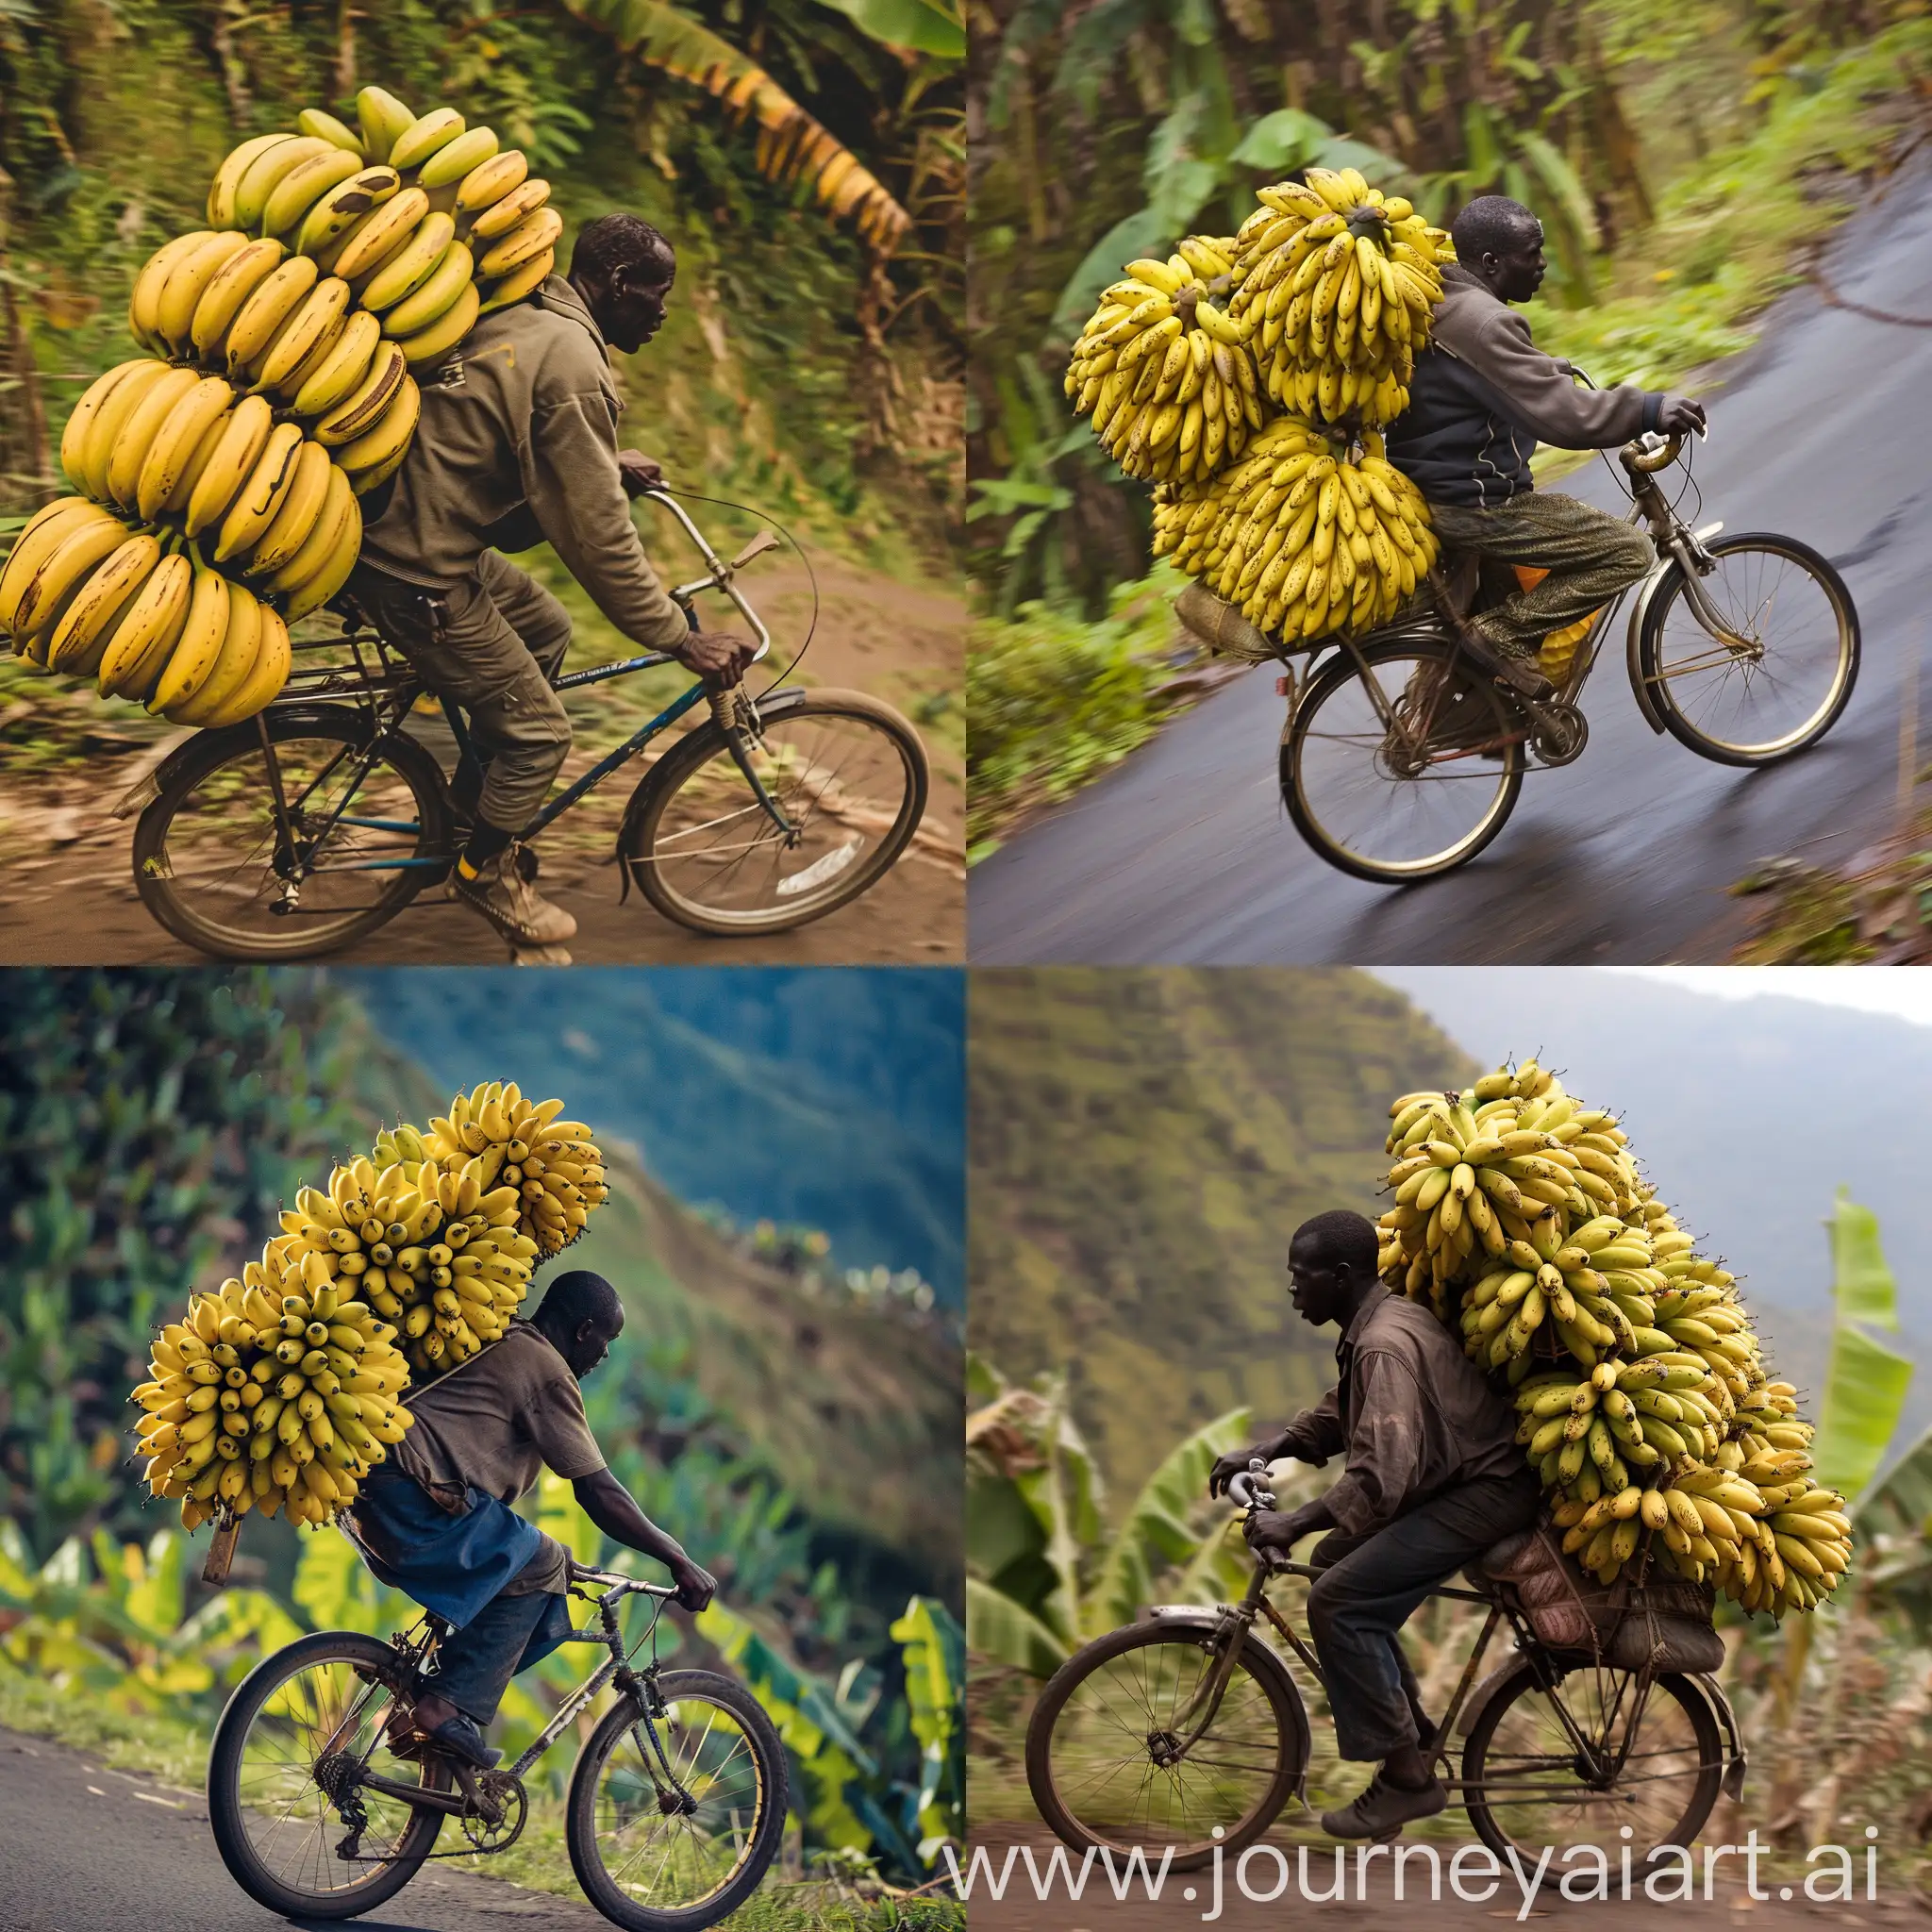  black man, riding a bicycle, loaded with 400 Jin bananas, sped along the downhill road.